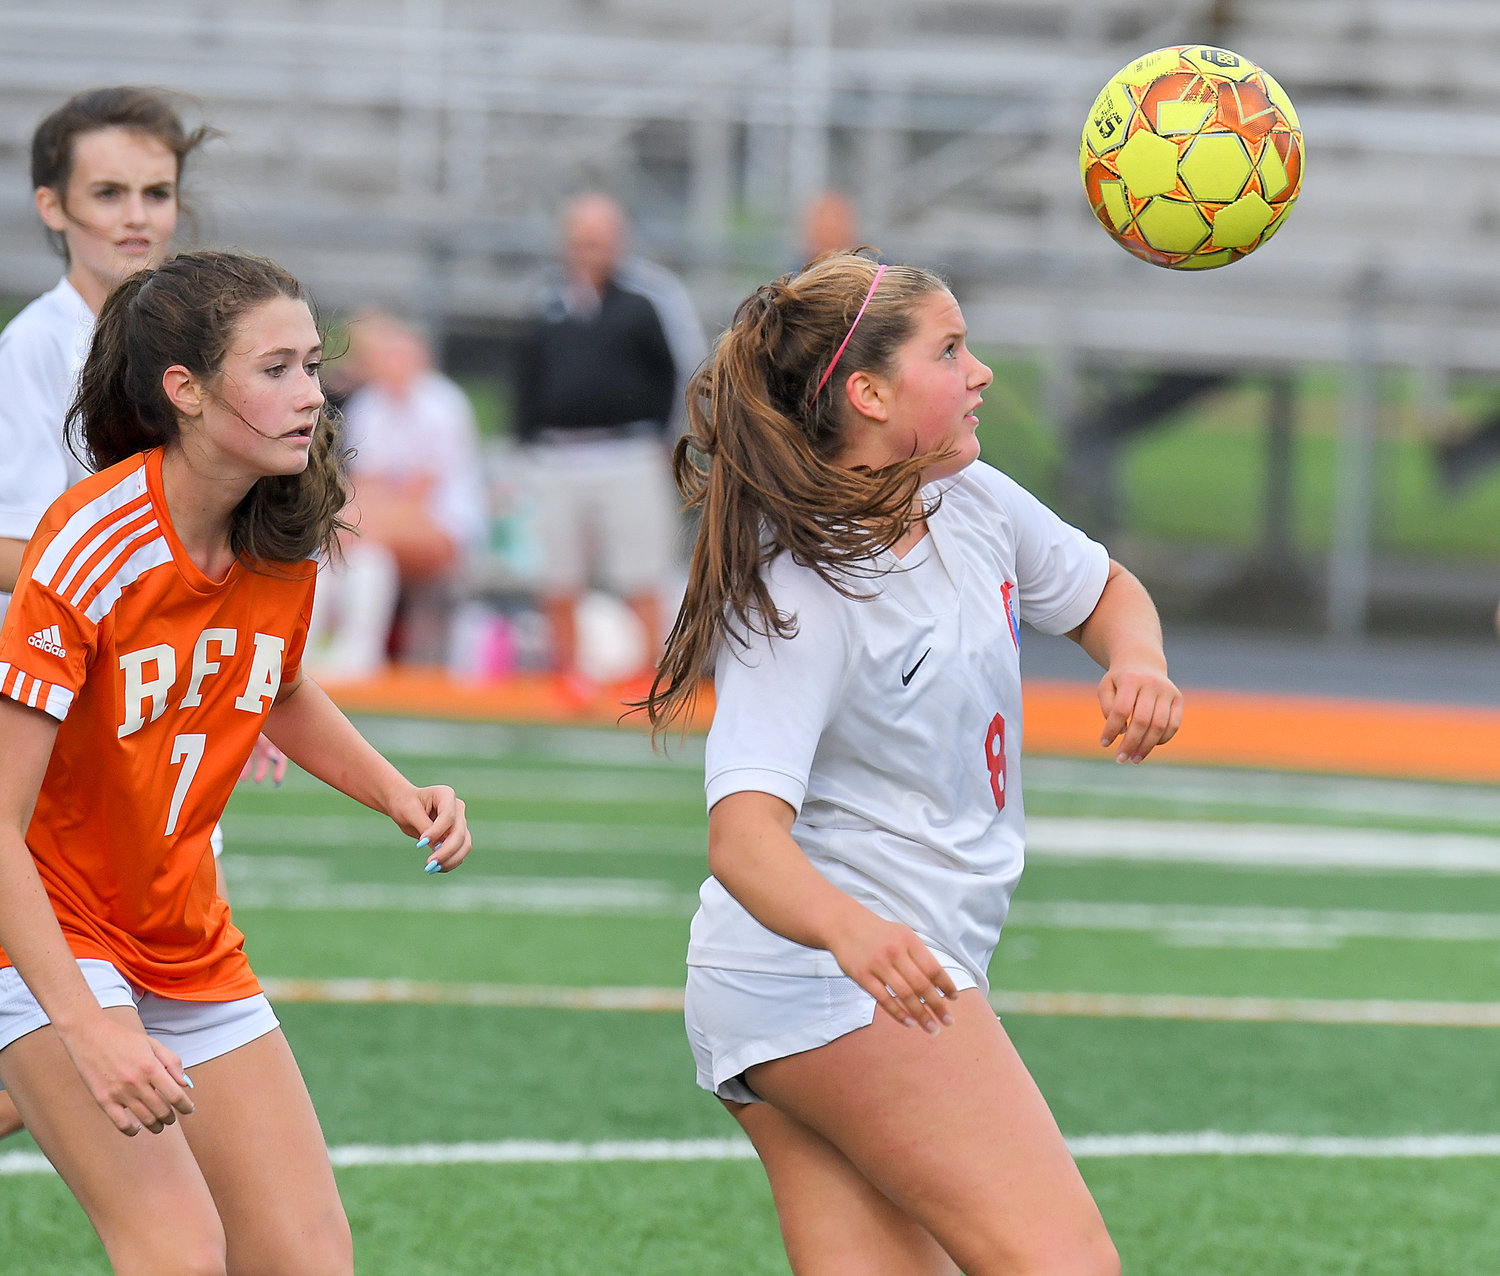 New Hartford's Mia Roberts looks to make a play as RFA's Hannah Gann challenges behind her Thursday at RFA Stadium.